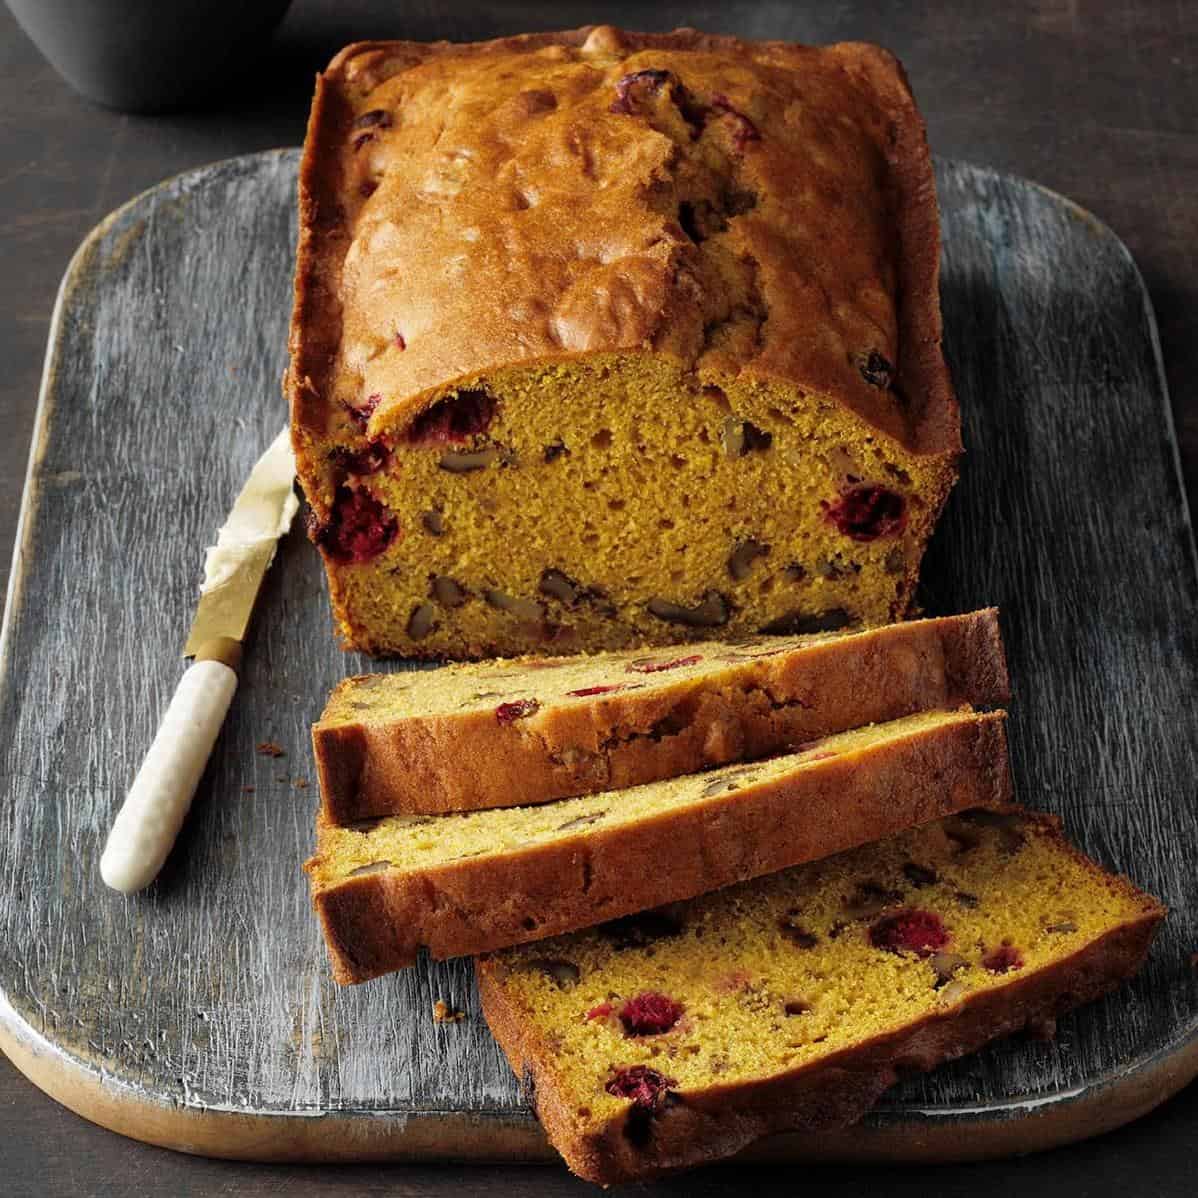  Once you taste the tangy cranberry swirl and the hint of pumpkin spice, you'll be